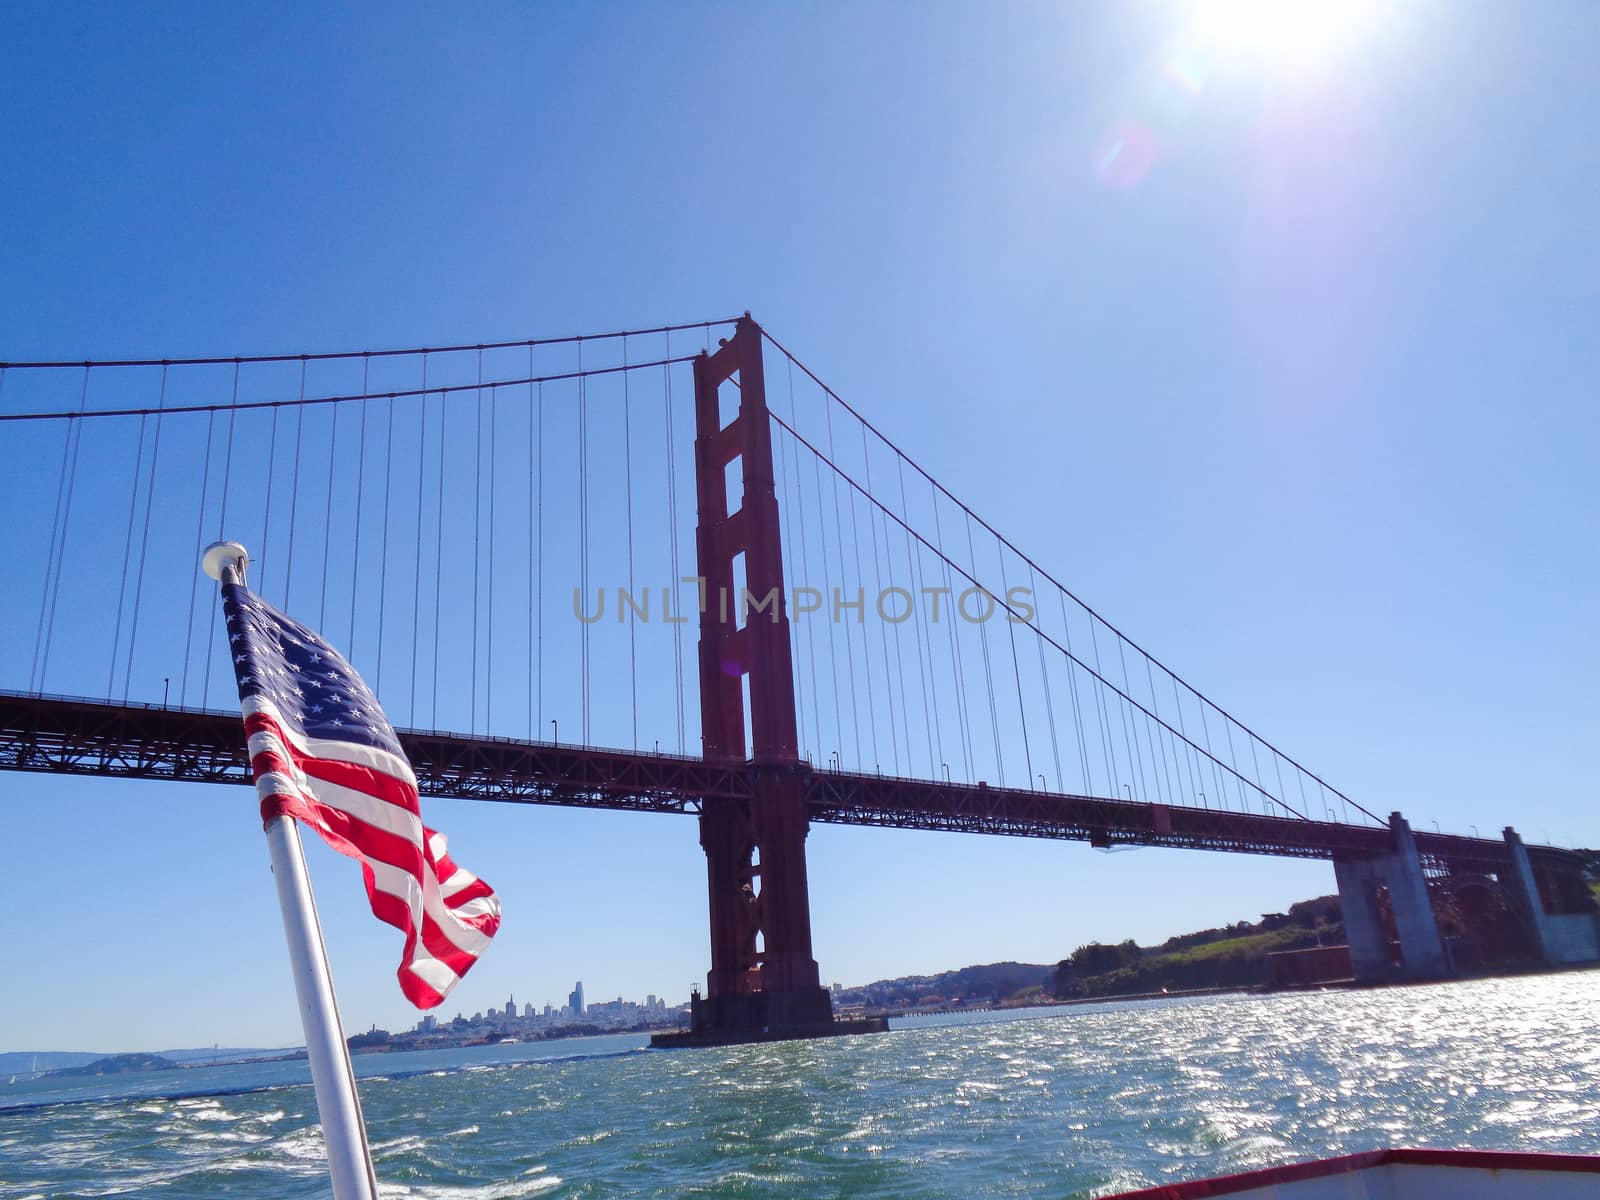 golden gate bridge from the boat by Tevion25